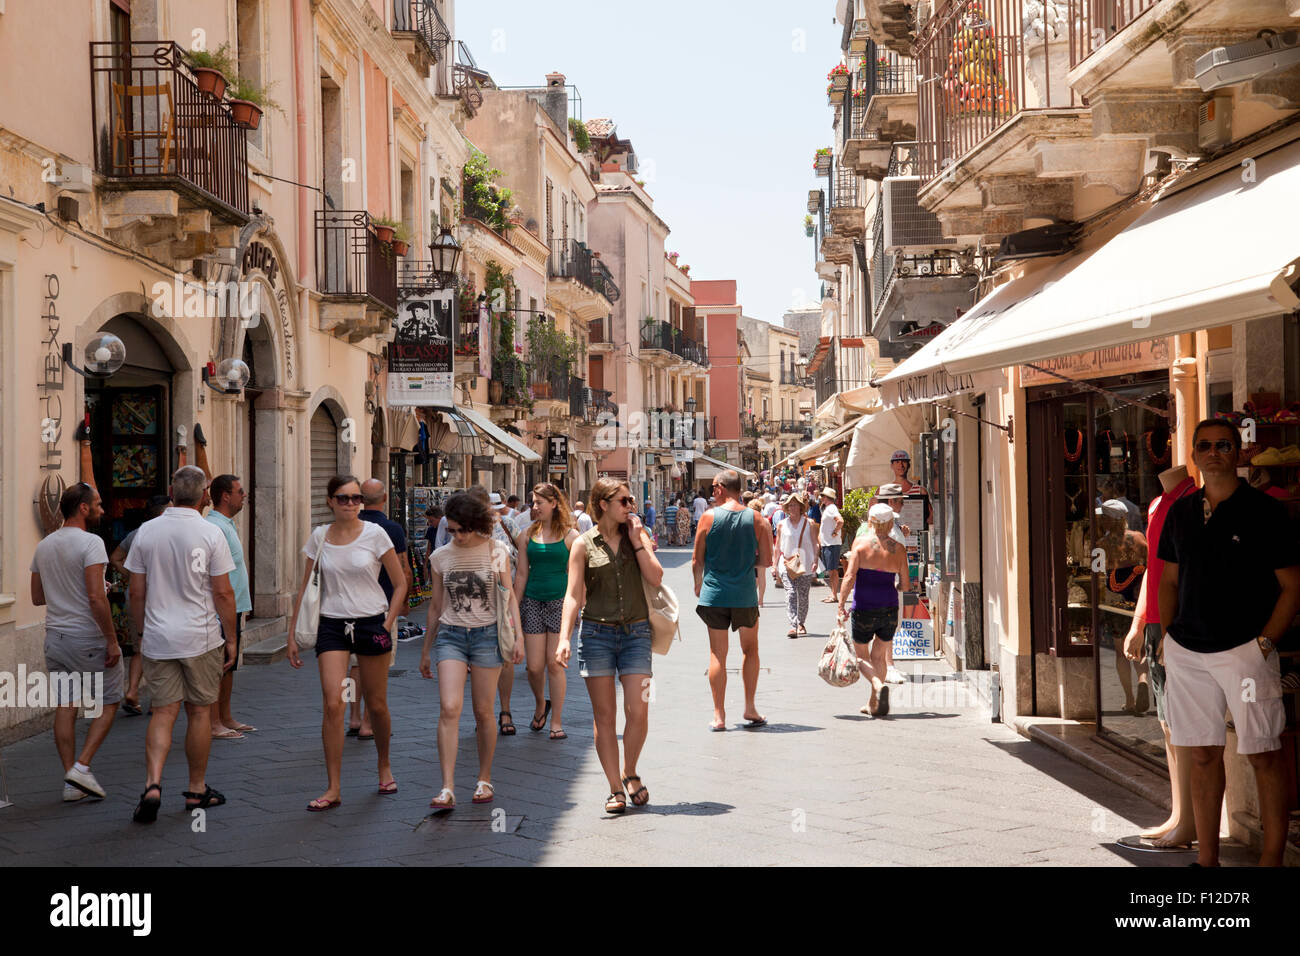 Corso Umberto I the main street in Old Town Taormina, Sicily, Italy filled with tourists Stock Photo